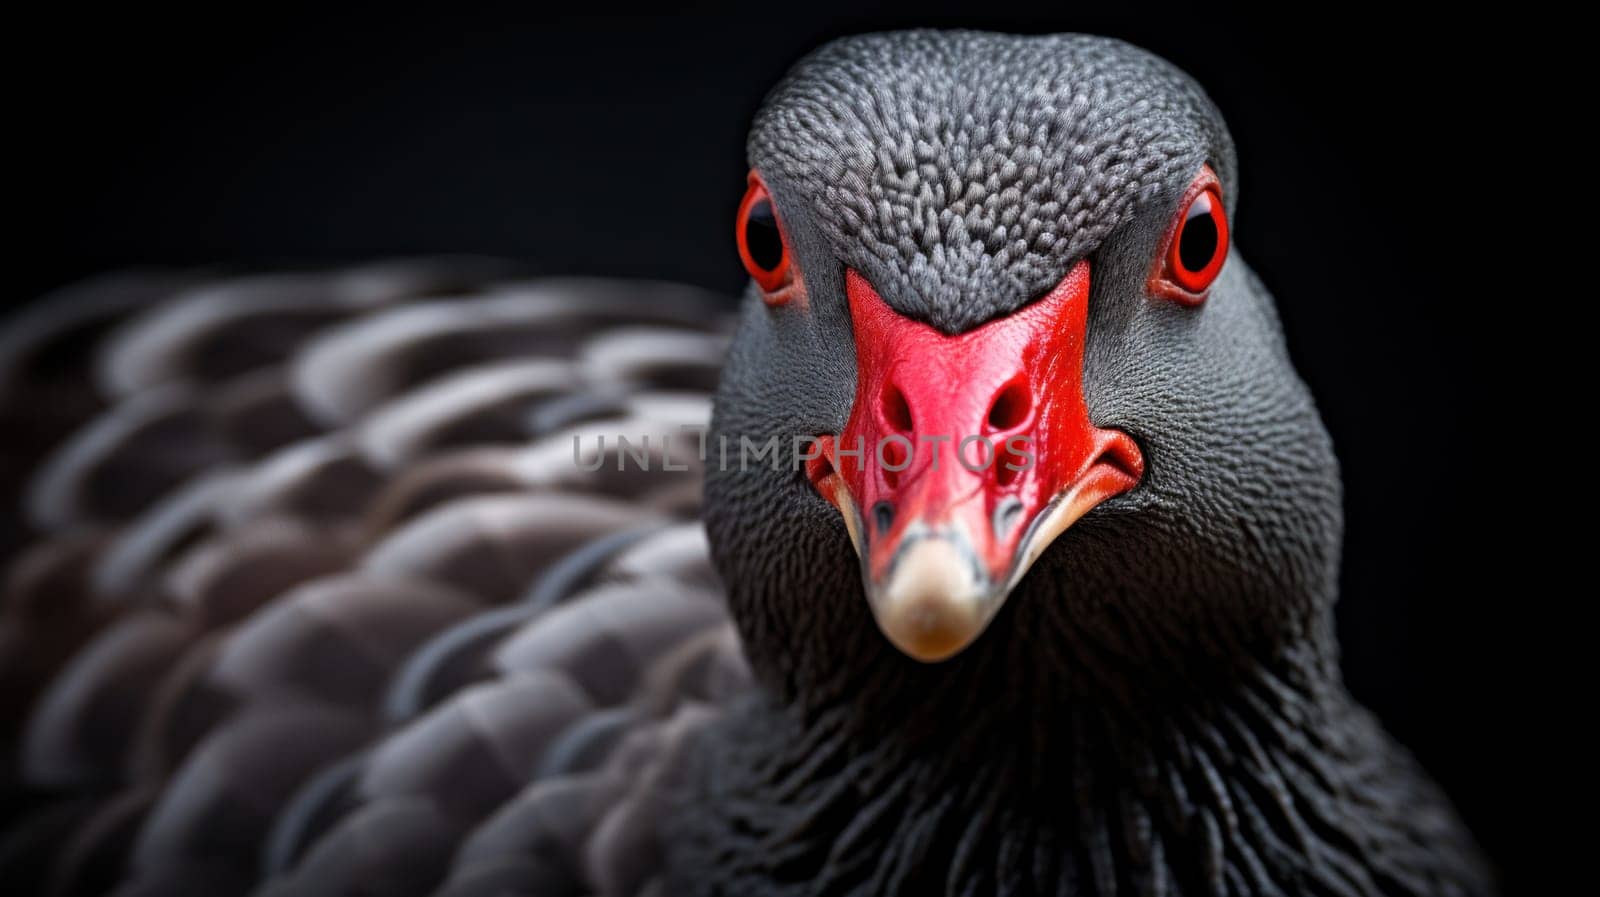 A close up of a bird with red eyes and black feathers